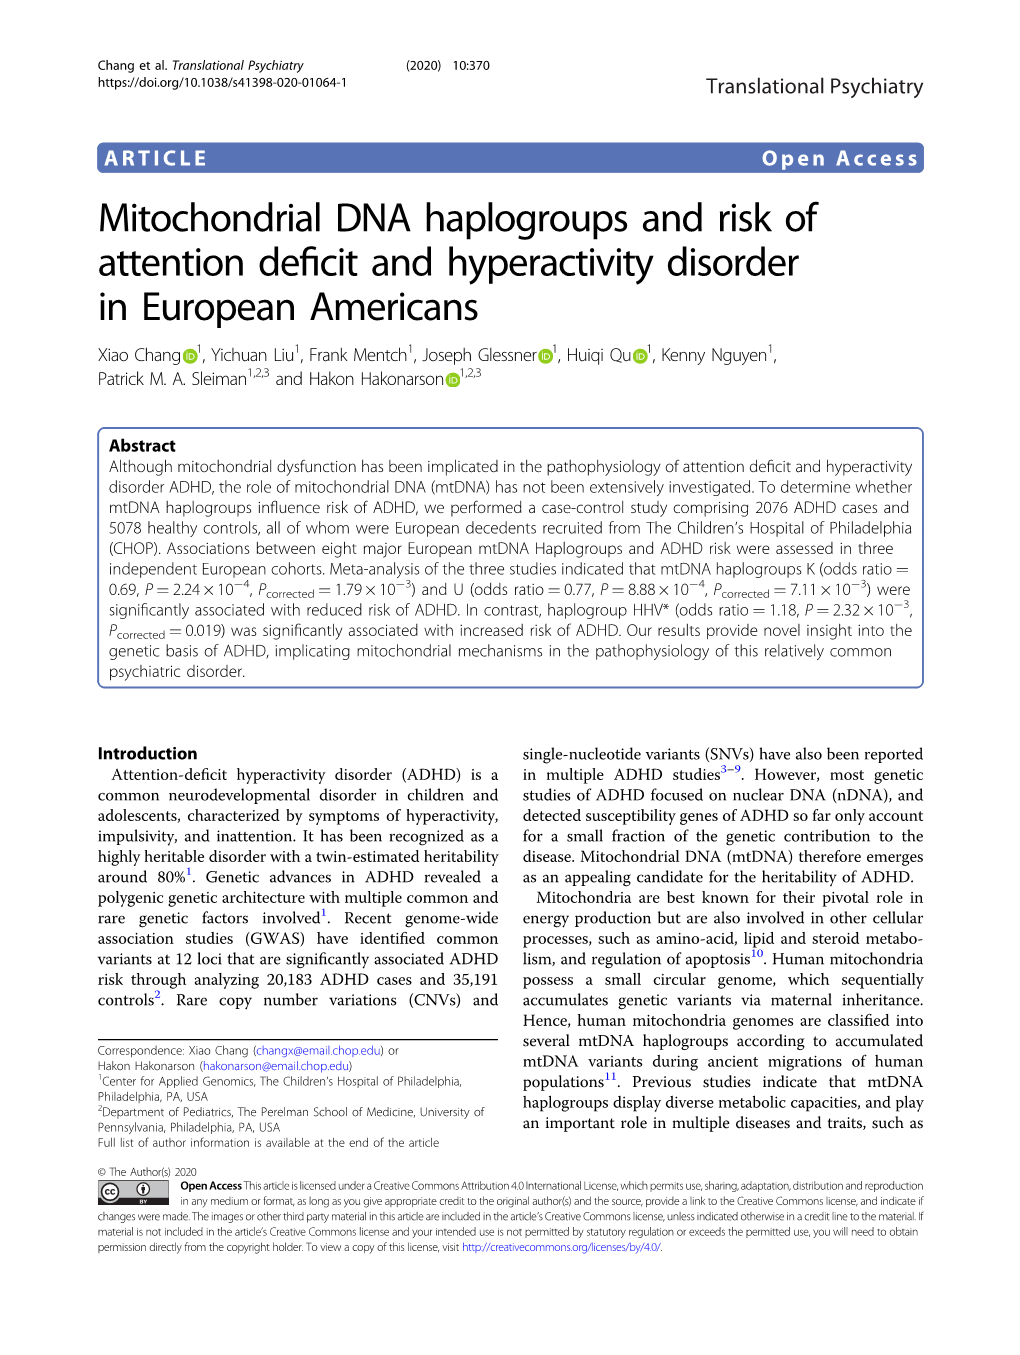 Mitochondrial DNA Haplogroups and Risk of Attention Deficit and Hyperactivity Disorder in European Americans